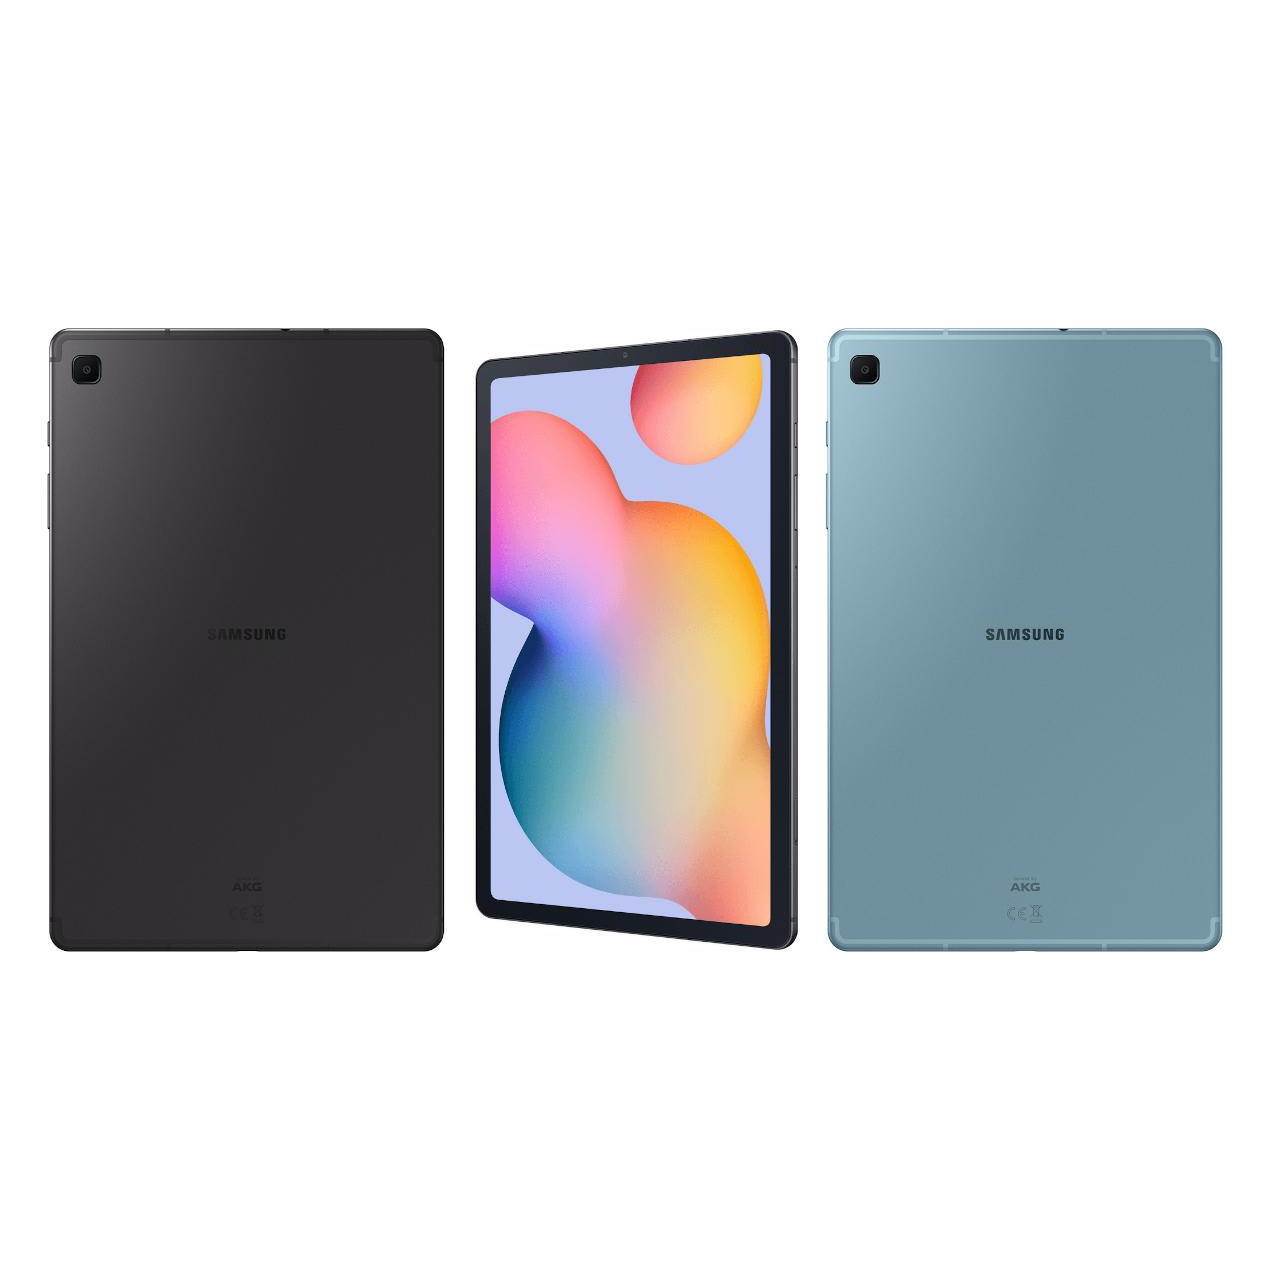 Samsung Galaxy Tab S6 deals can save you $80 at Amazon this week